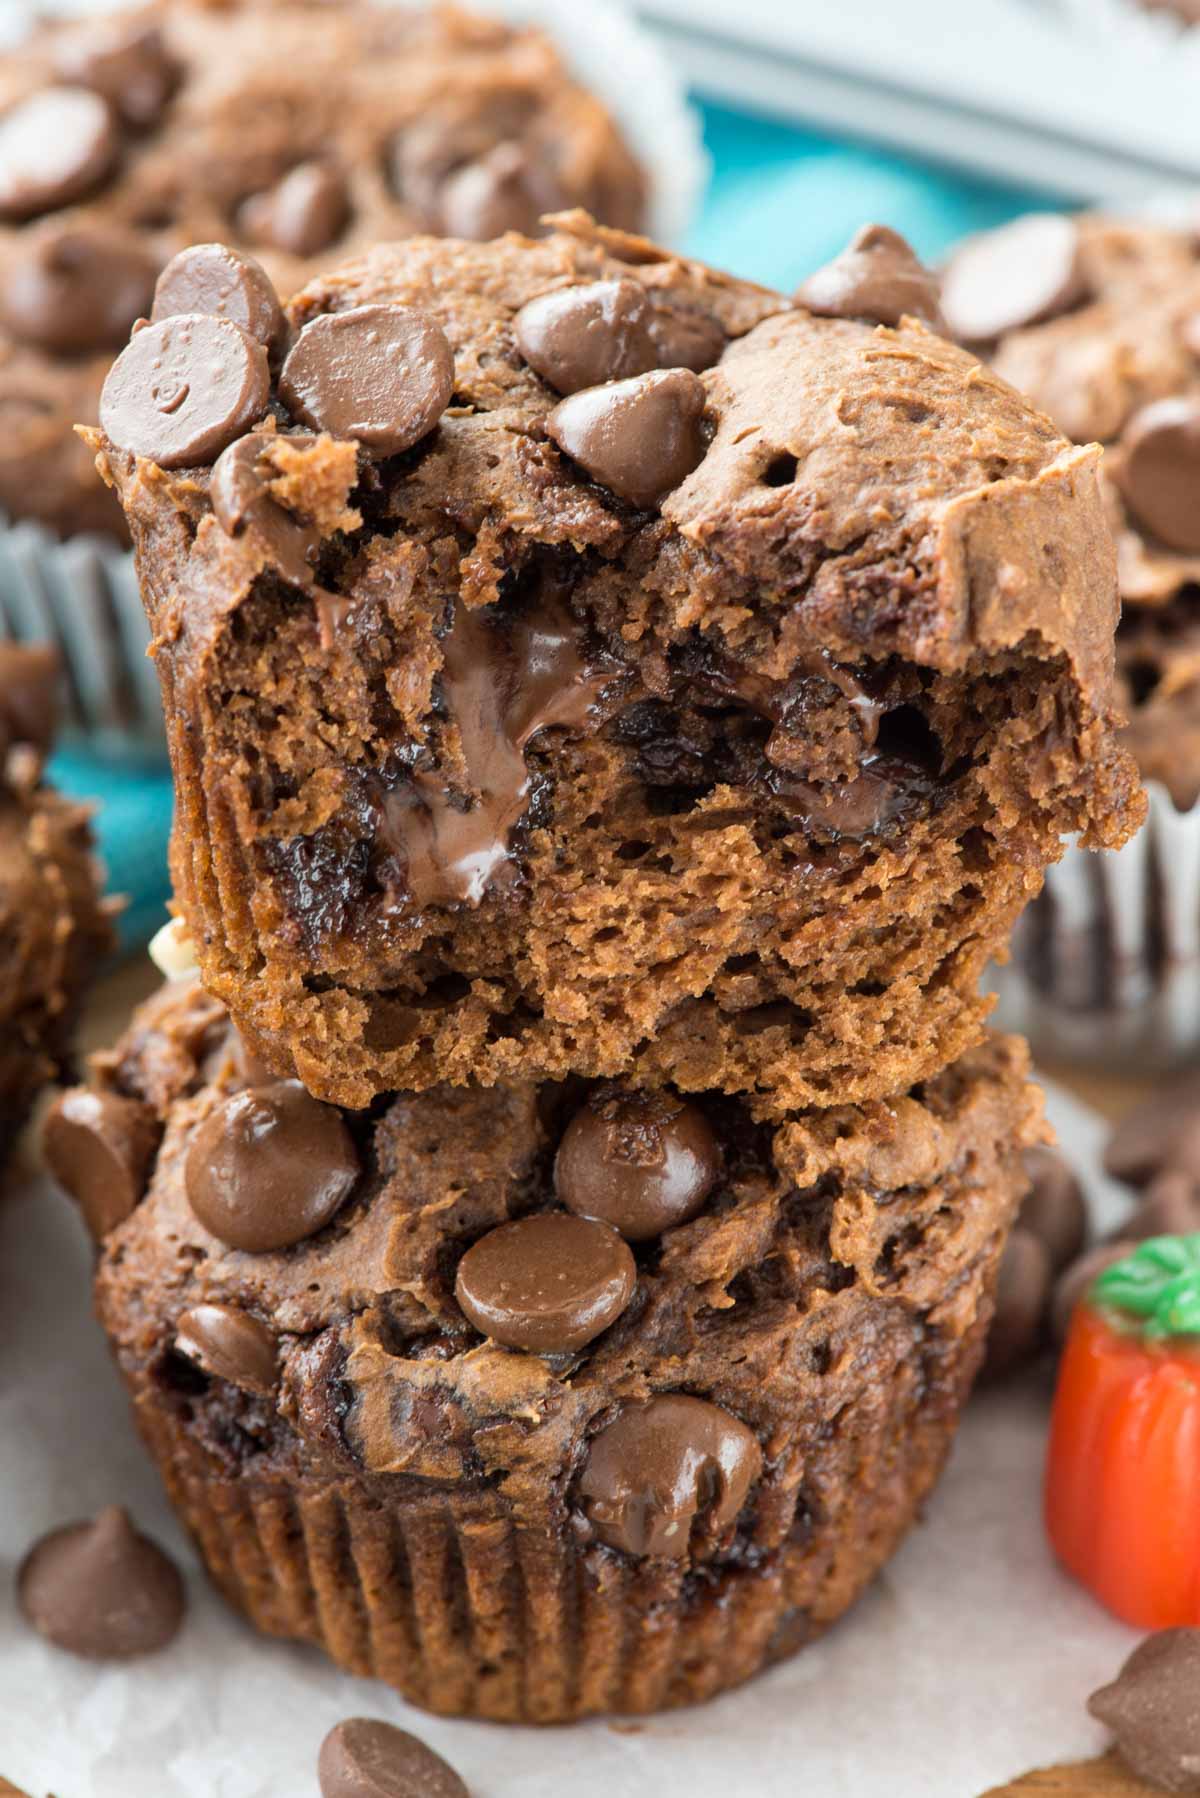 stacked chocolate muffins with chocolate chips baked in.